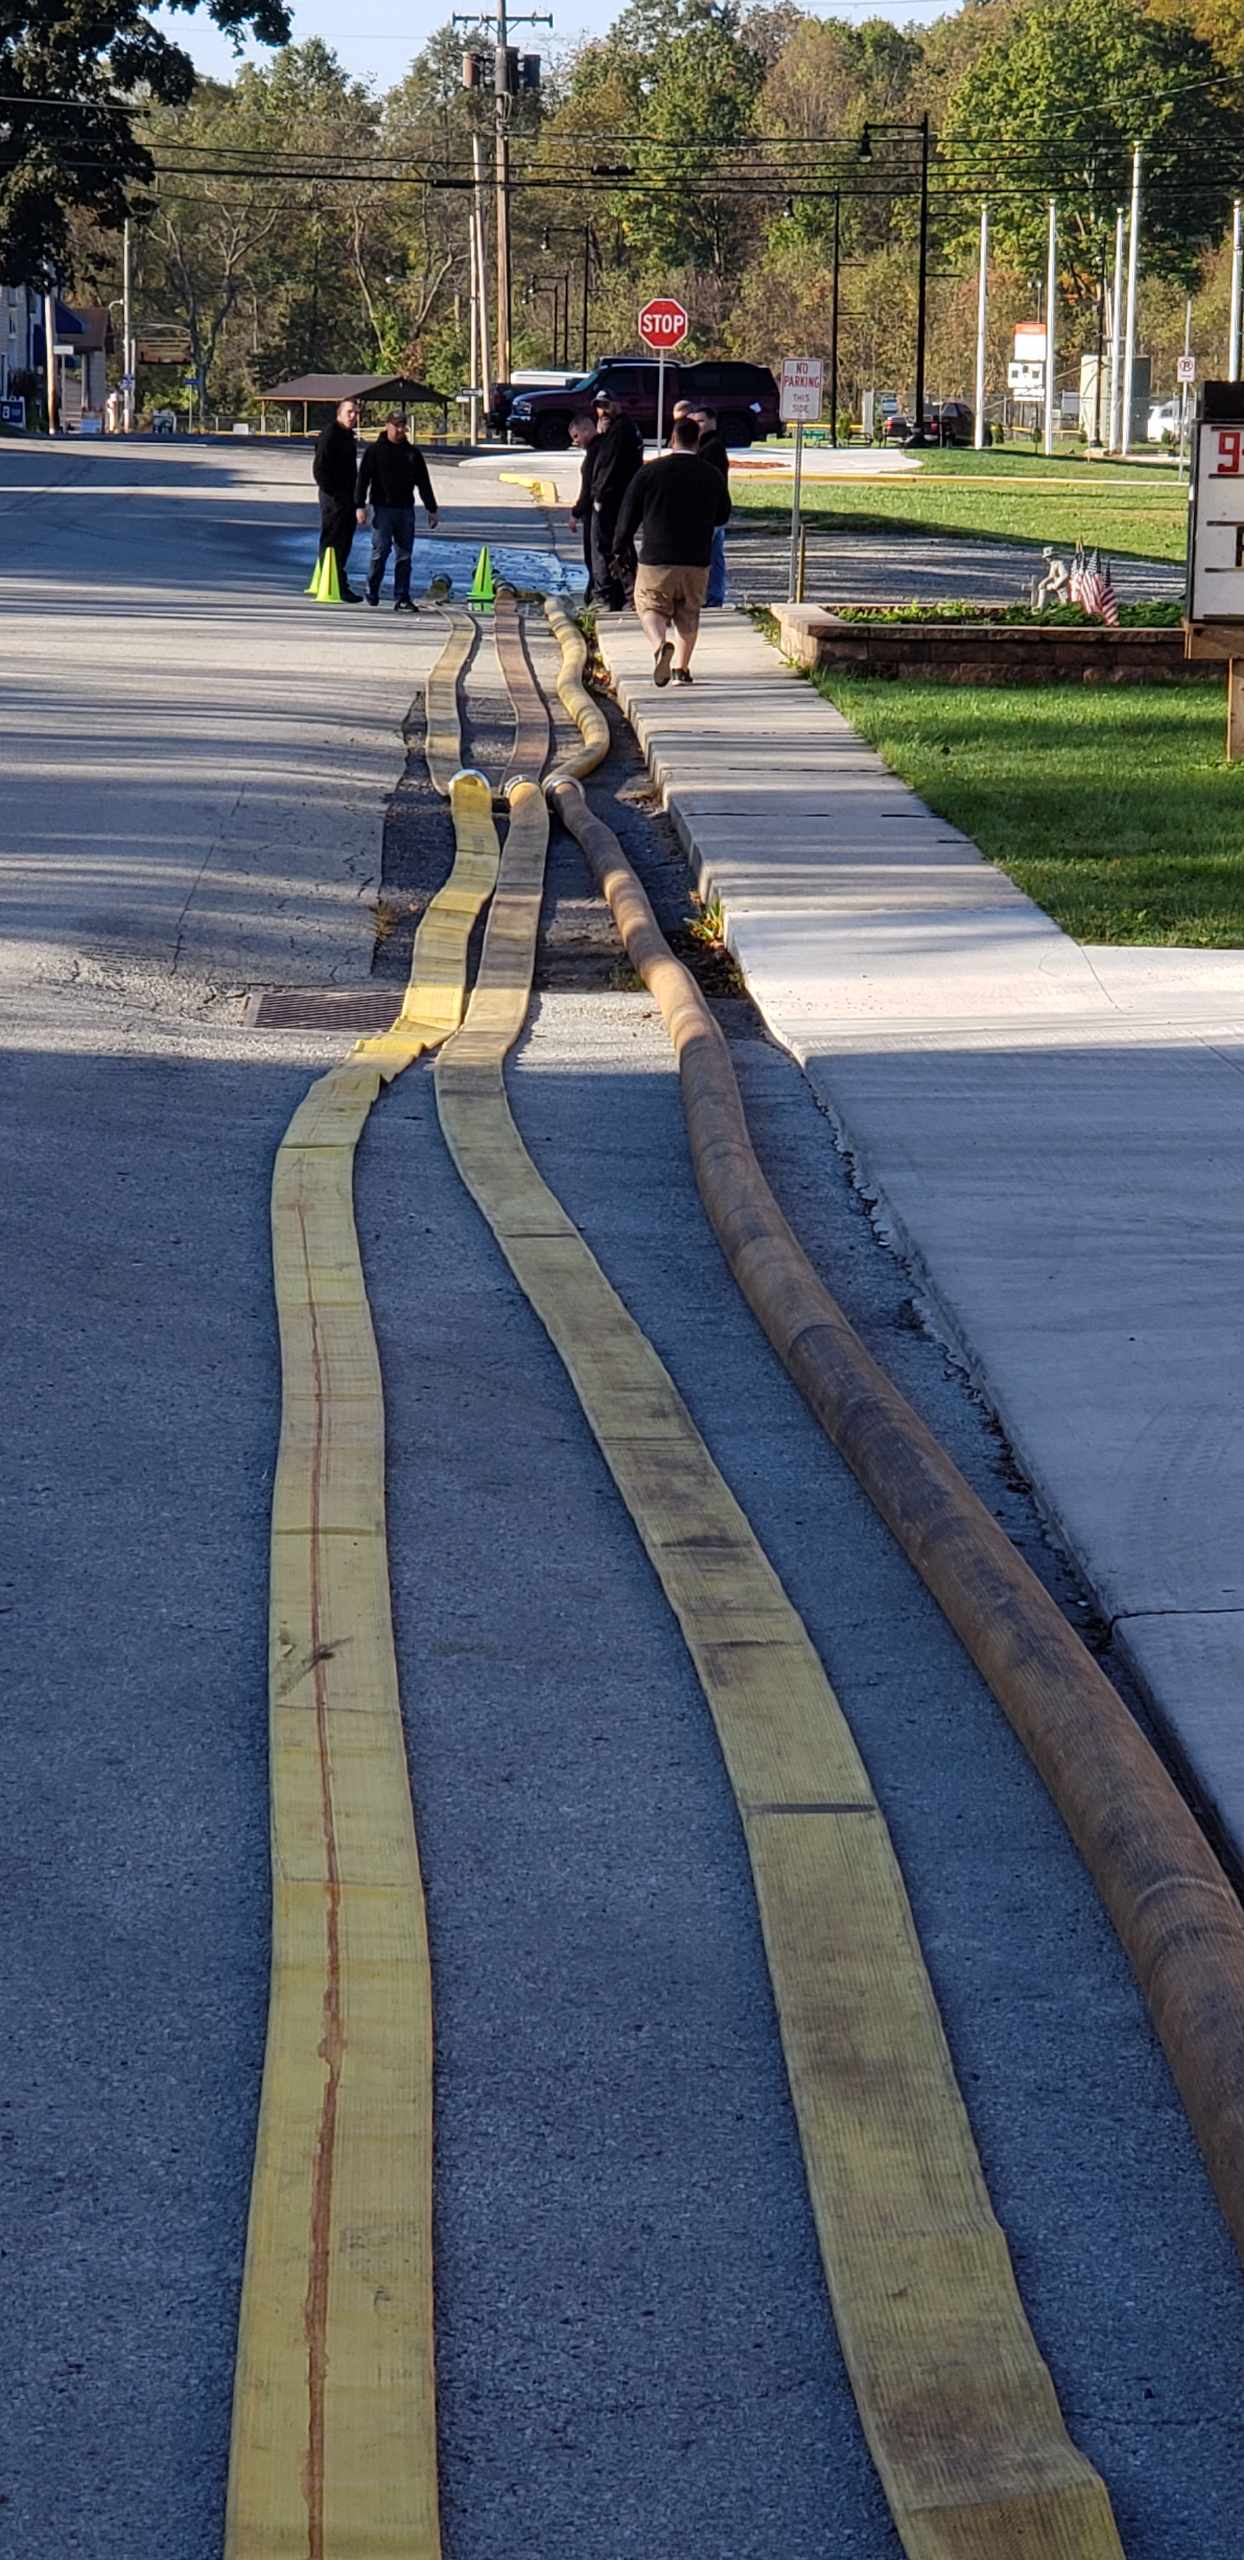 Long firehoses stretched along the street